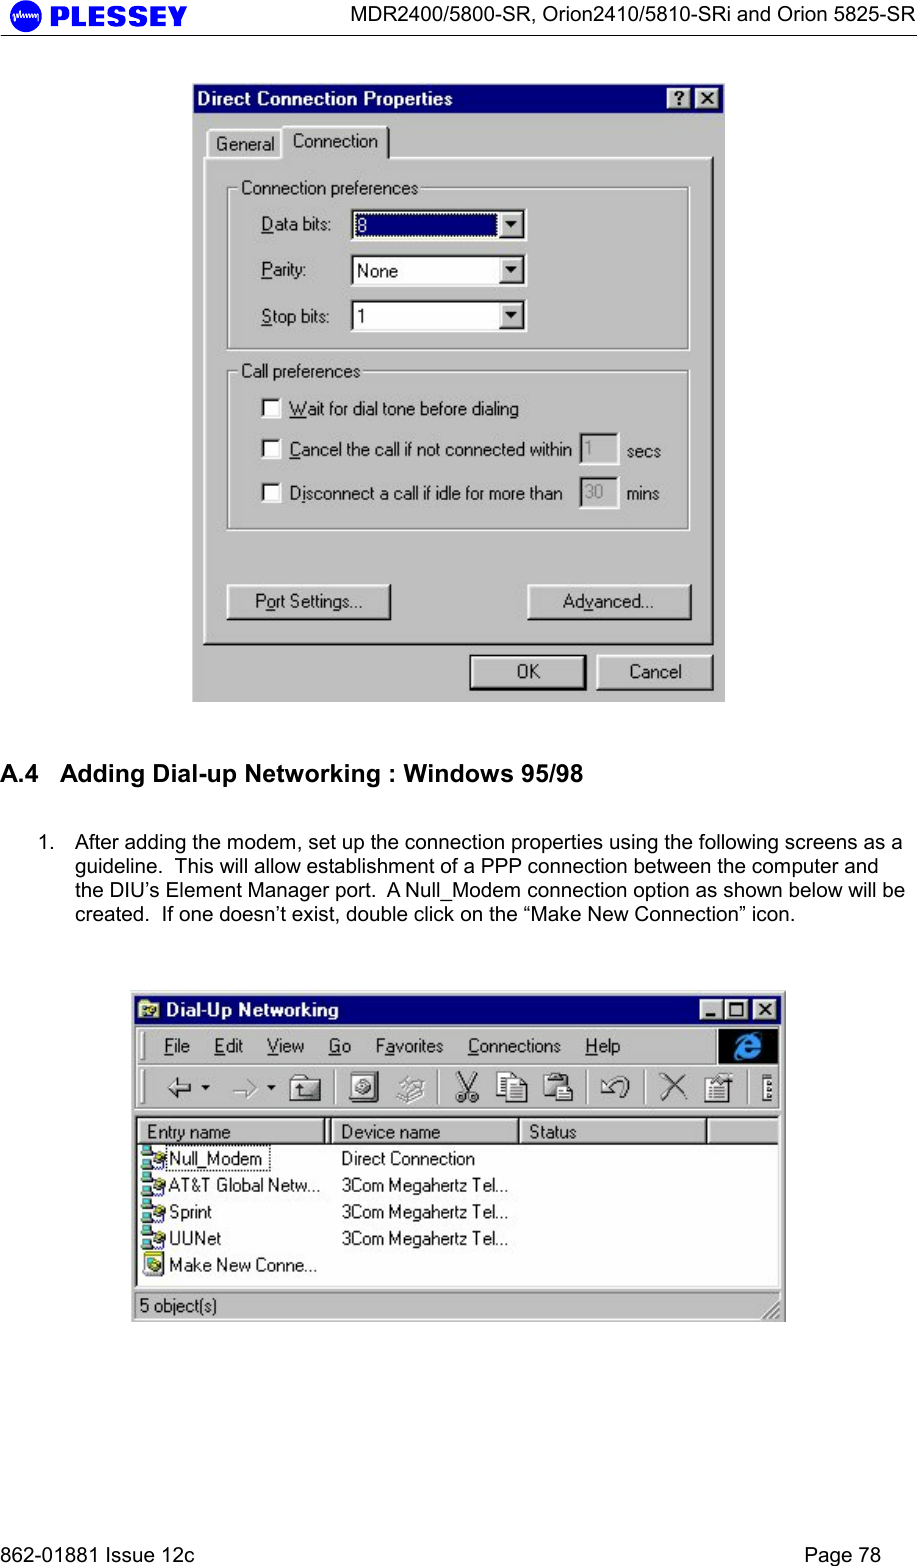      MDR2400/5800-SR, Orion2410/5810-SRi and Orion 5825-SR   862-01881 Issue 12c    Page 78    A.4  Adding Dial-up Networking : Windows 95/98  1.  After adding the modem, set up the connection properties using the following screens as a guideline.  This will allow establishment of a PPP connection between the computer and the DIU’s Element Manager port.  A Null_Modem connection option as shown below will be created.  If one doesn’t exist, double click on the “Make New Connection” icon.      